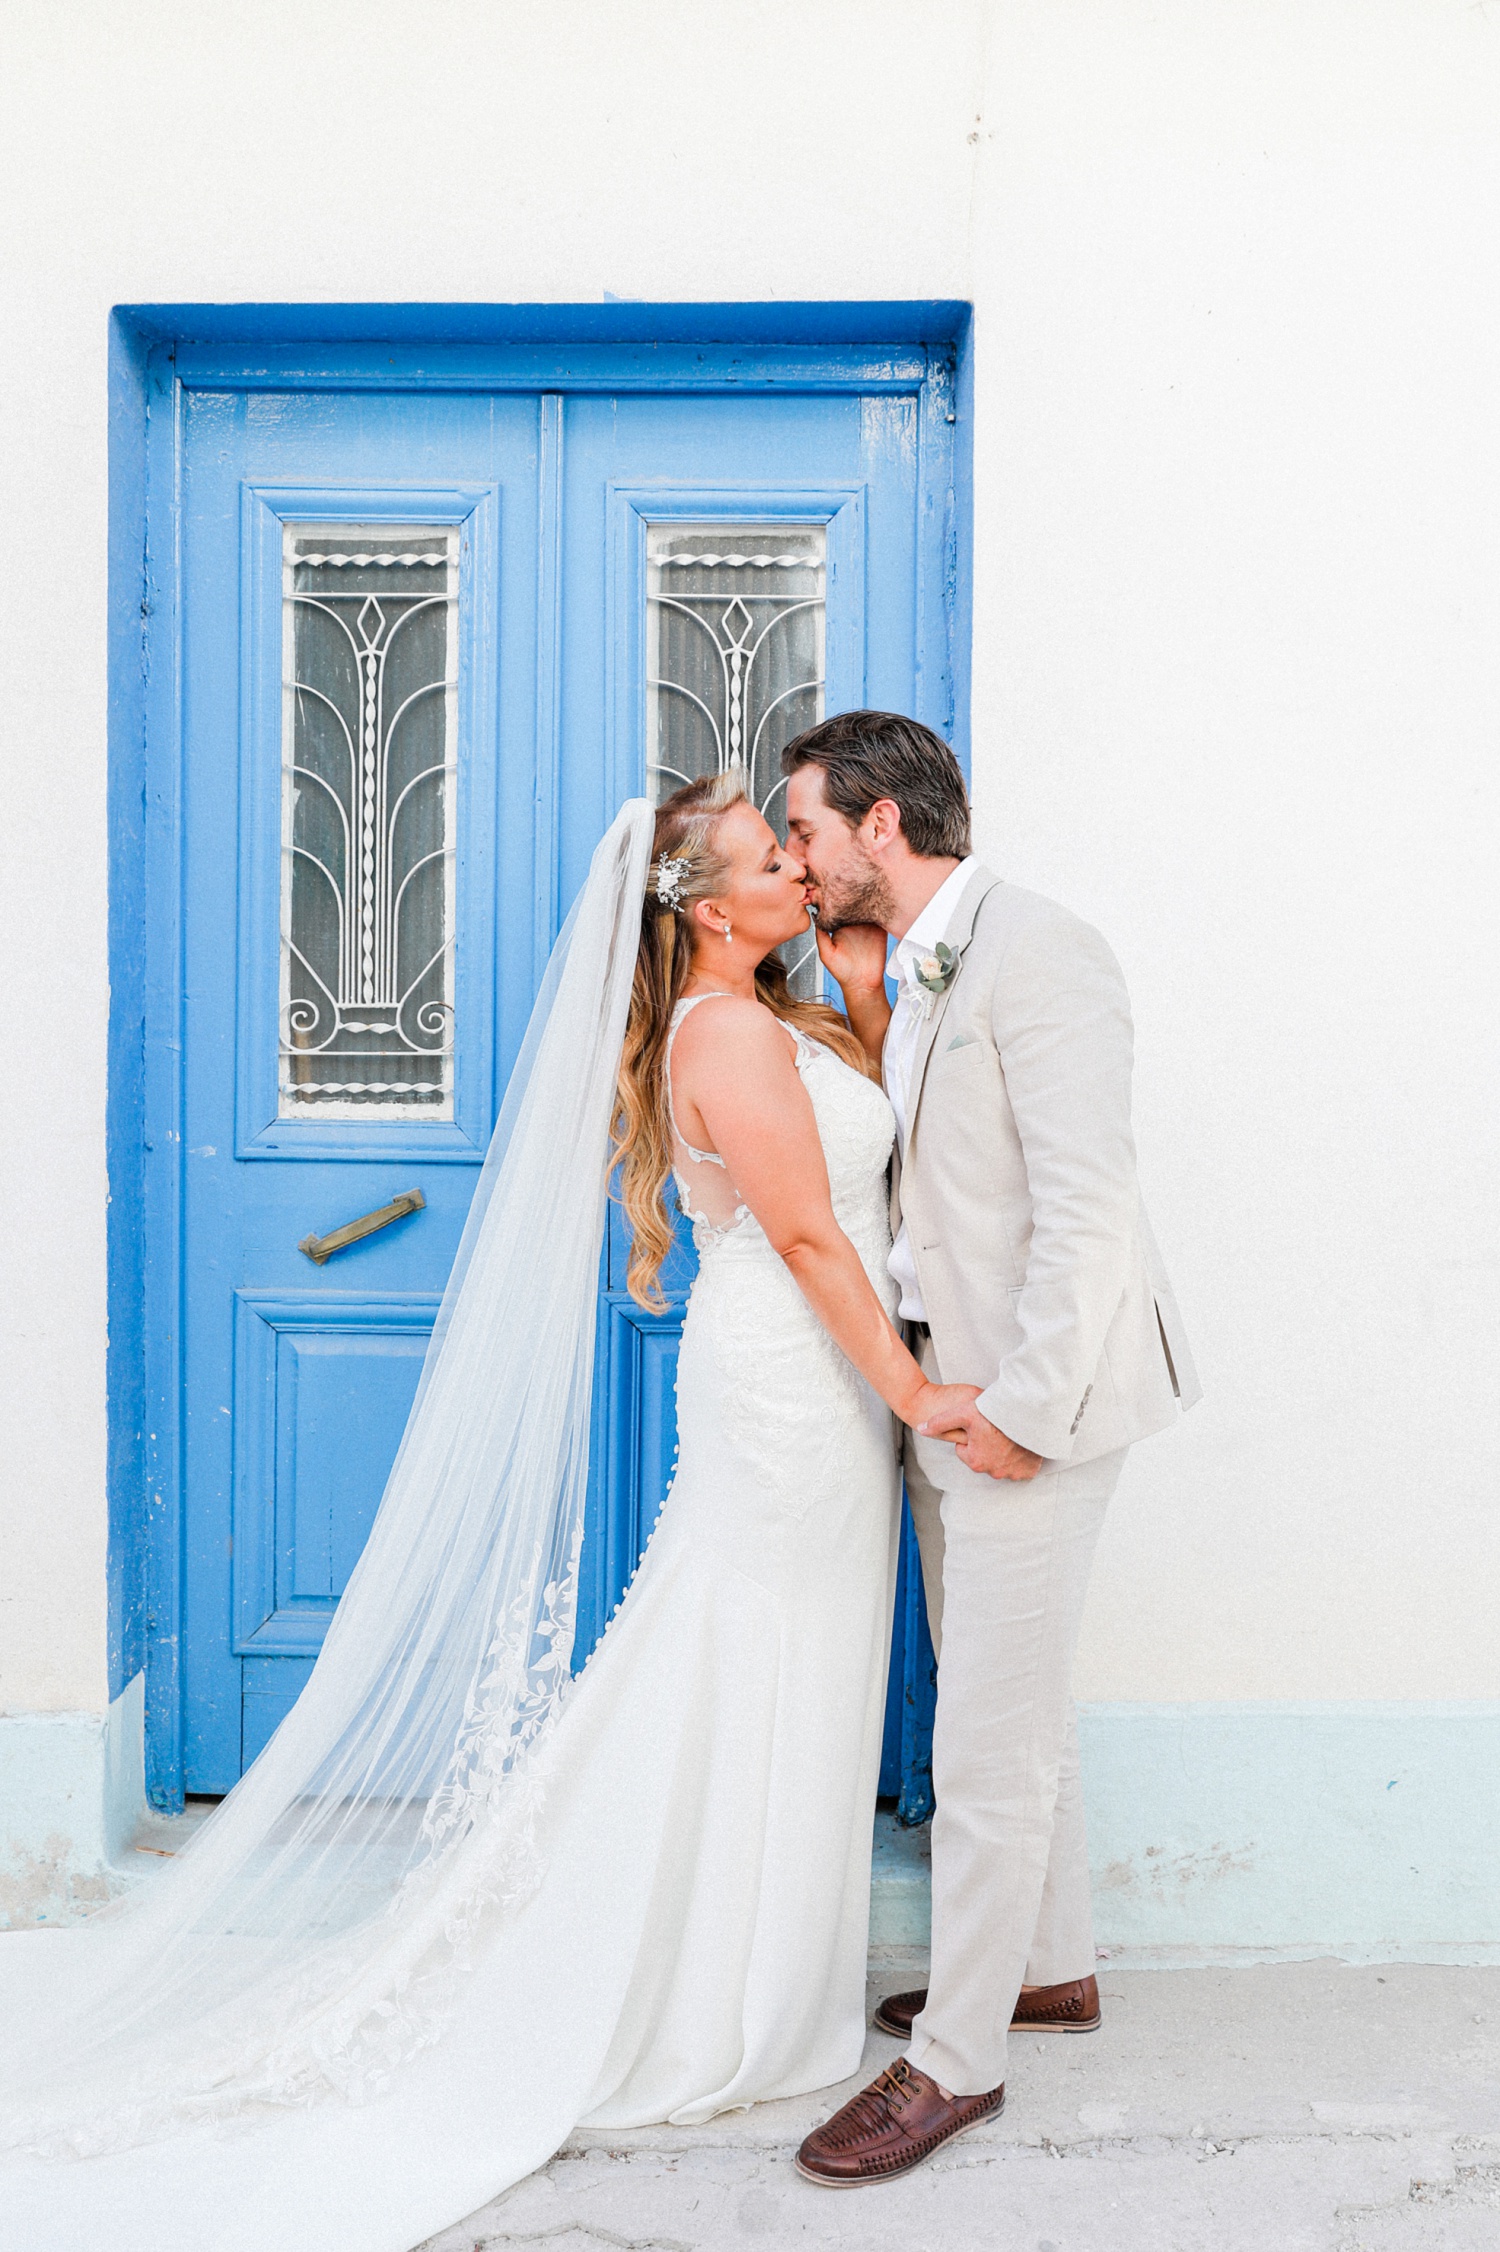 Bride and groom kiss in front of a blue door during their wedding in Parga